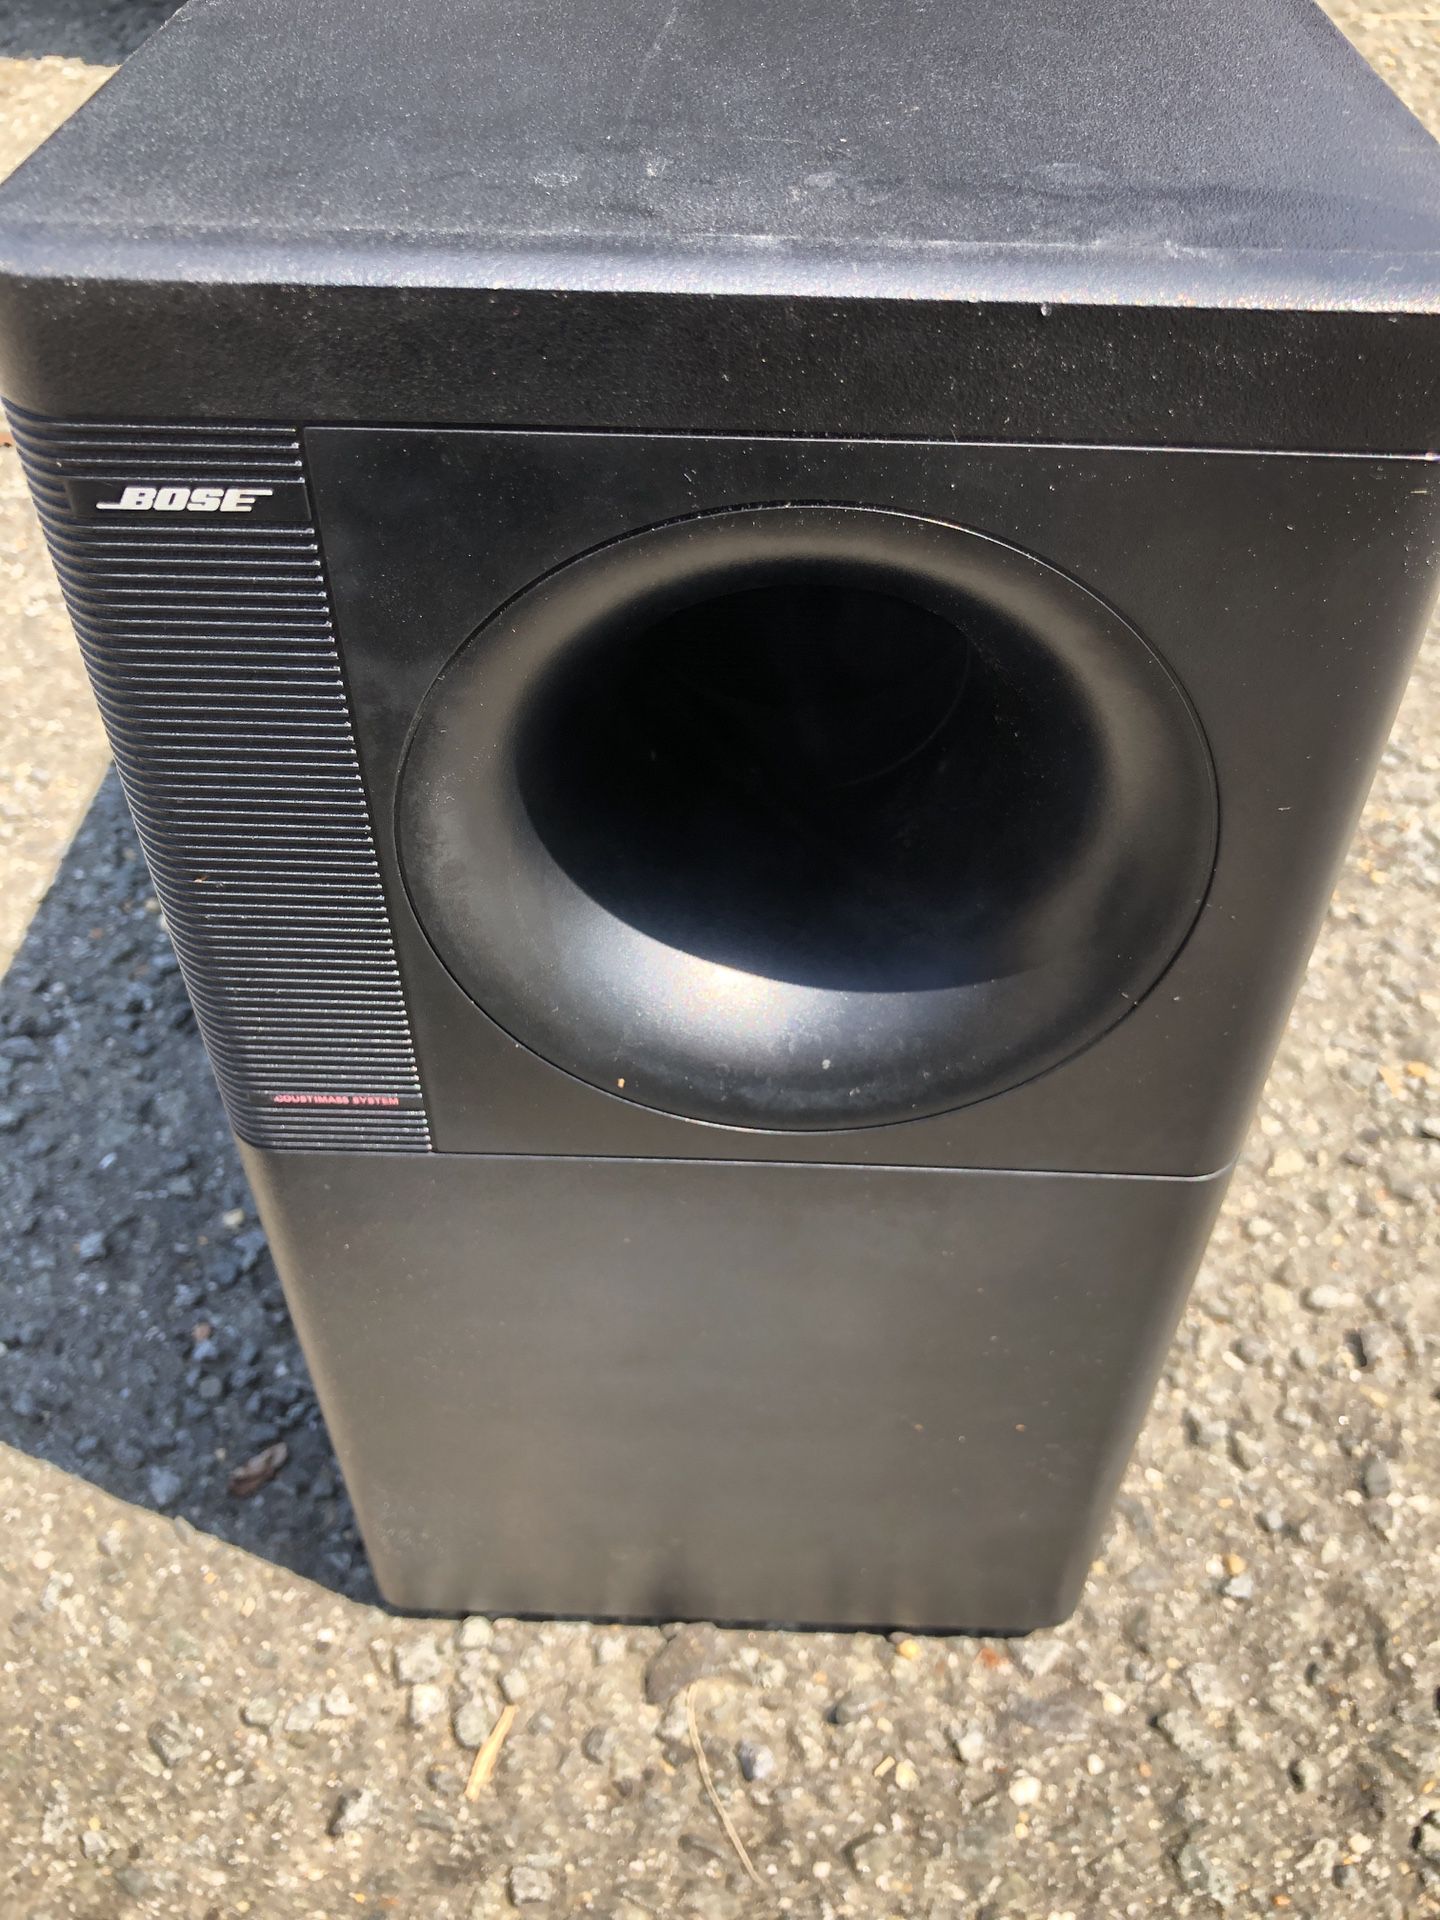 Bose subwoofer home entertainment system